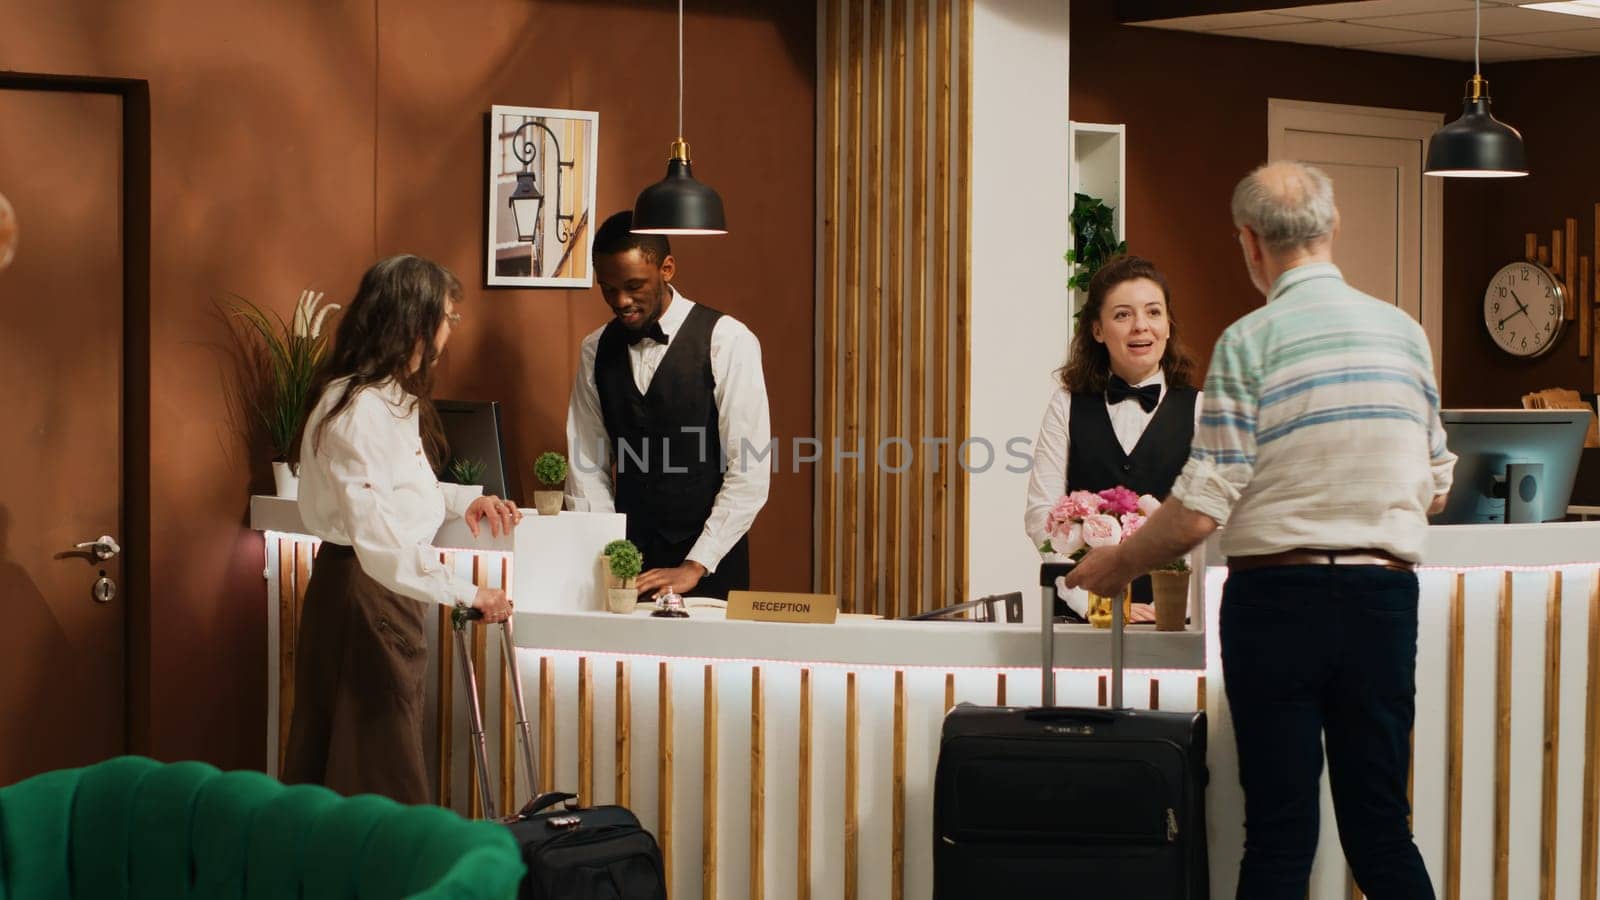 Retired couple arrive at hotel reception by DCStudio